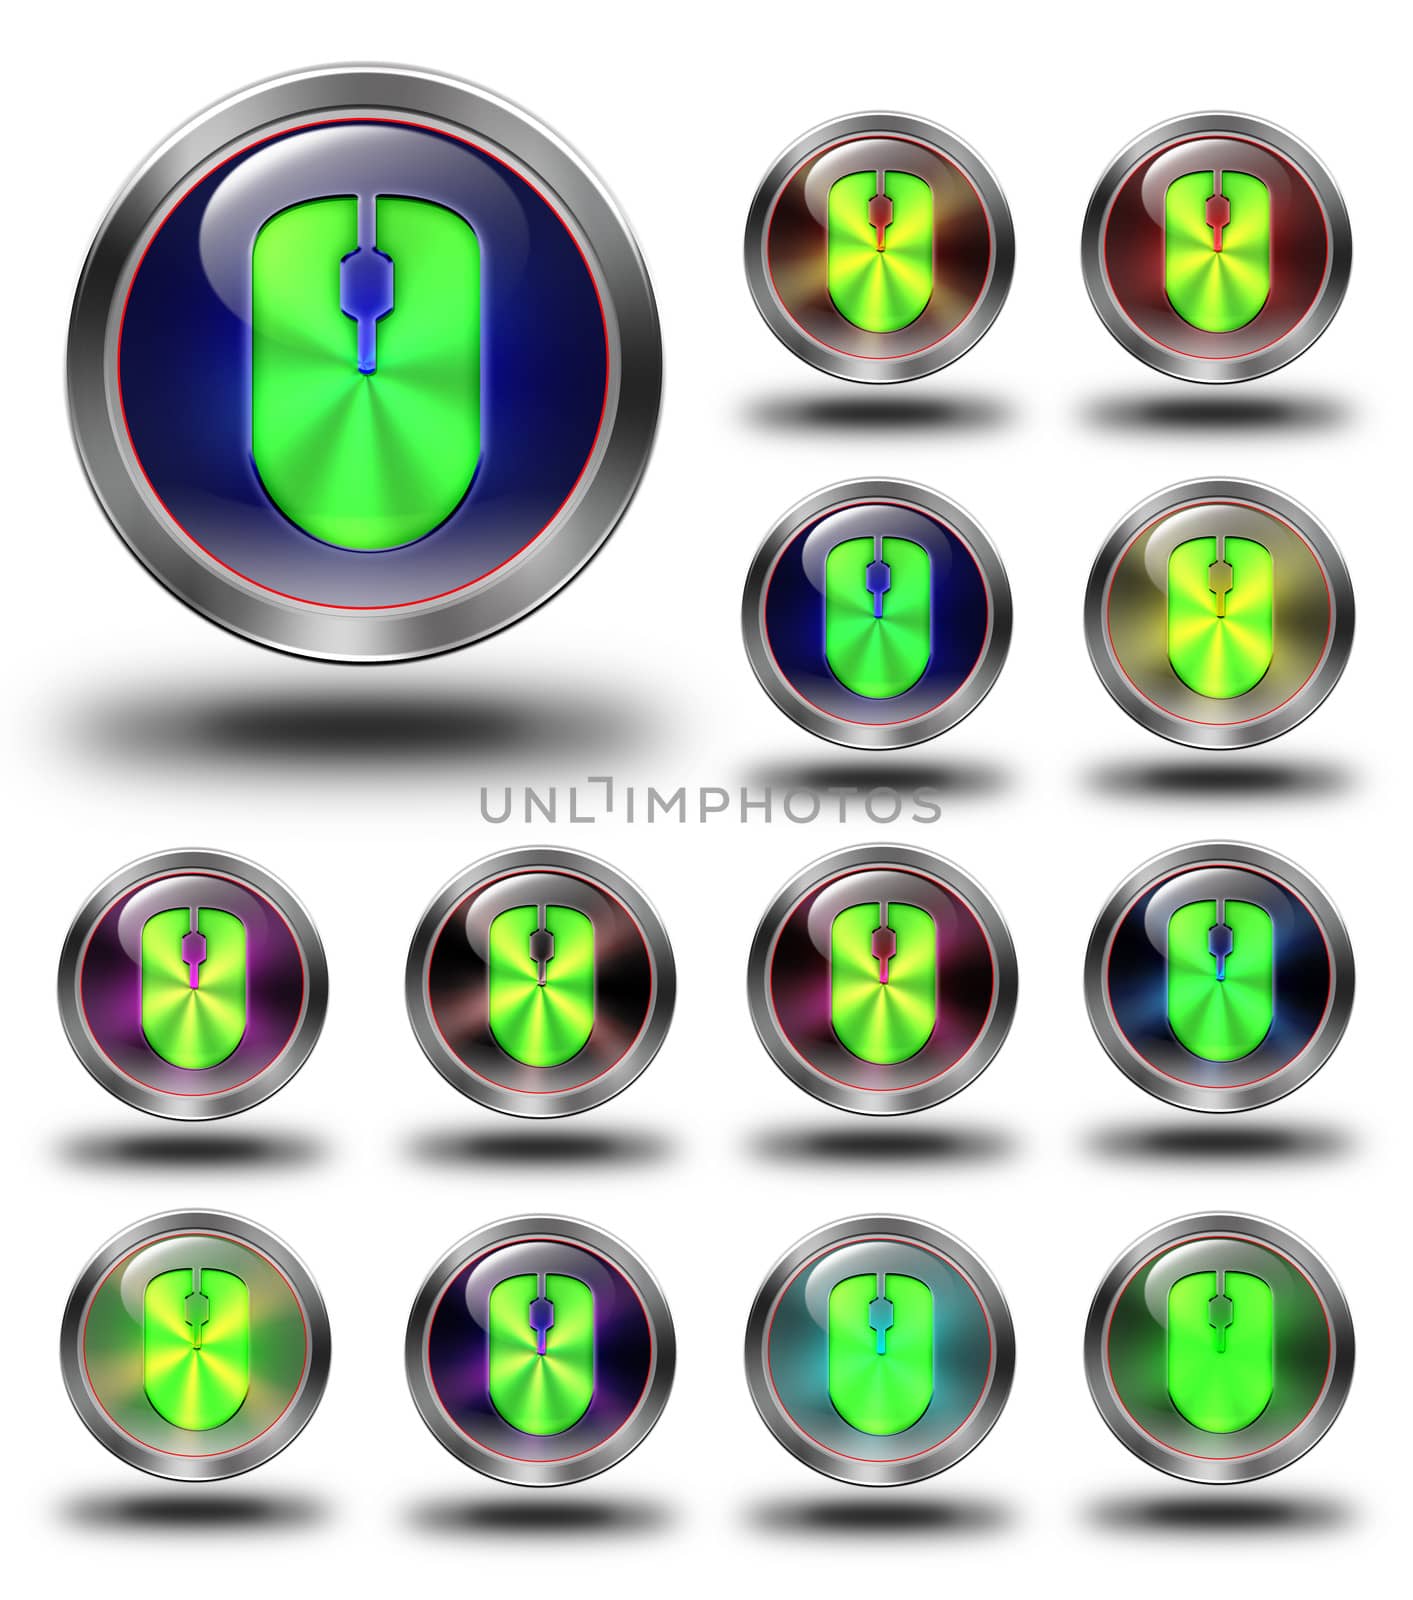 Mouse glossy icons, crazy colors by konradkerker